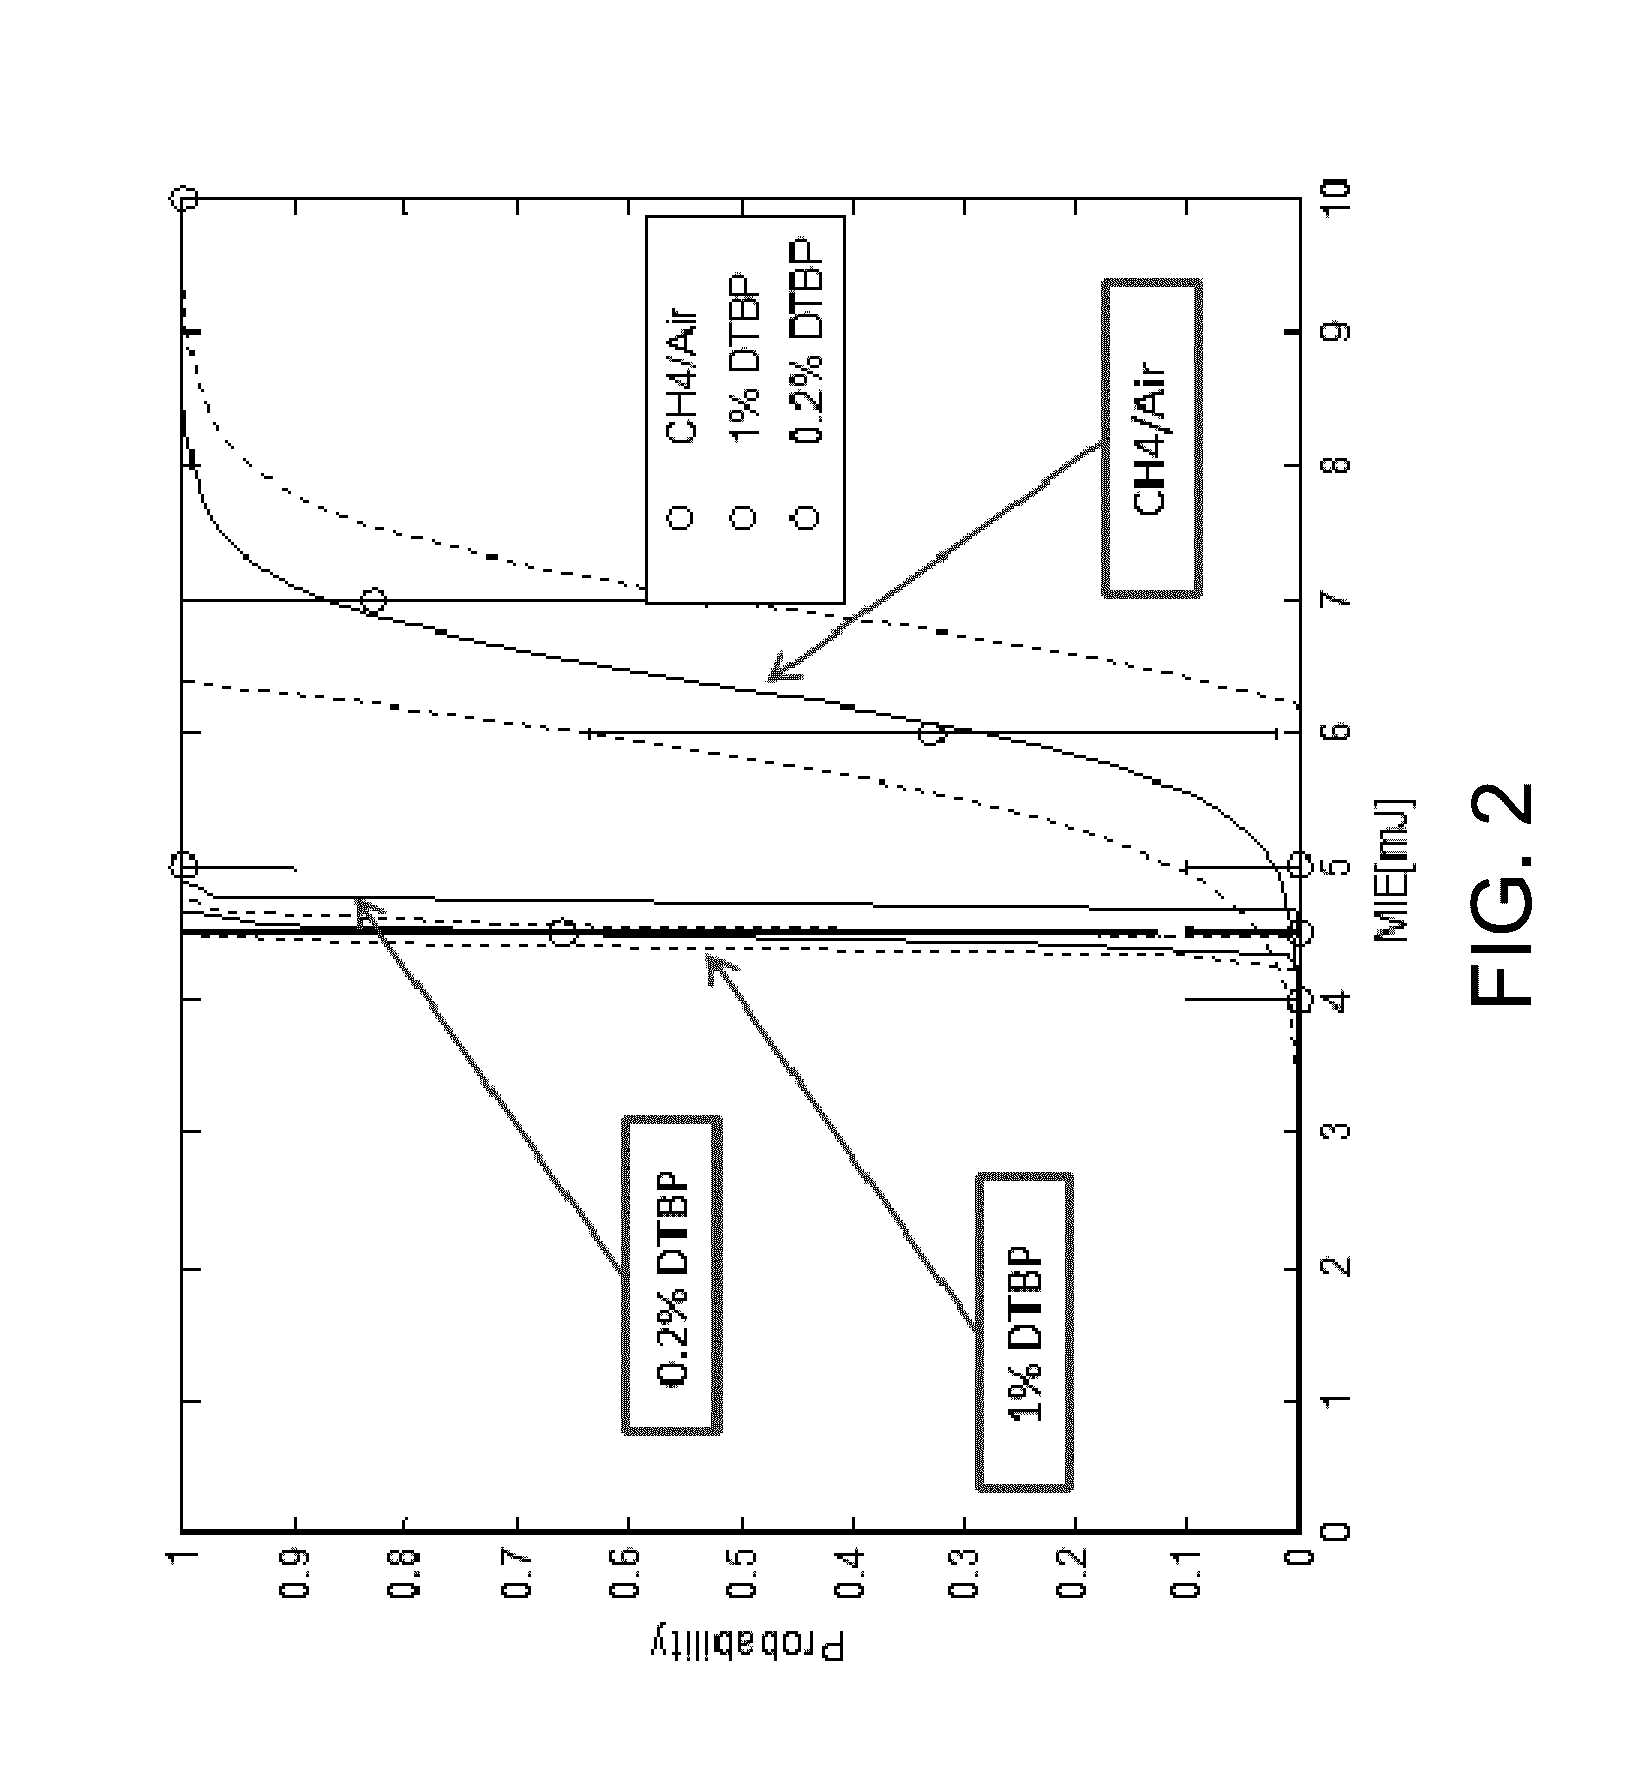 Fuel modifiers for natural gas reciprocating engines